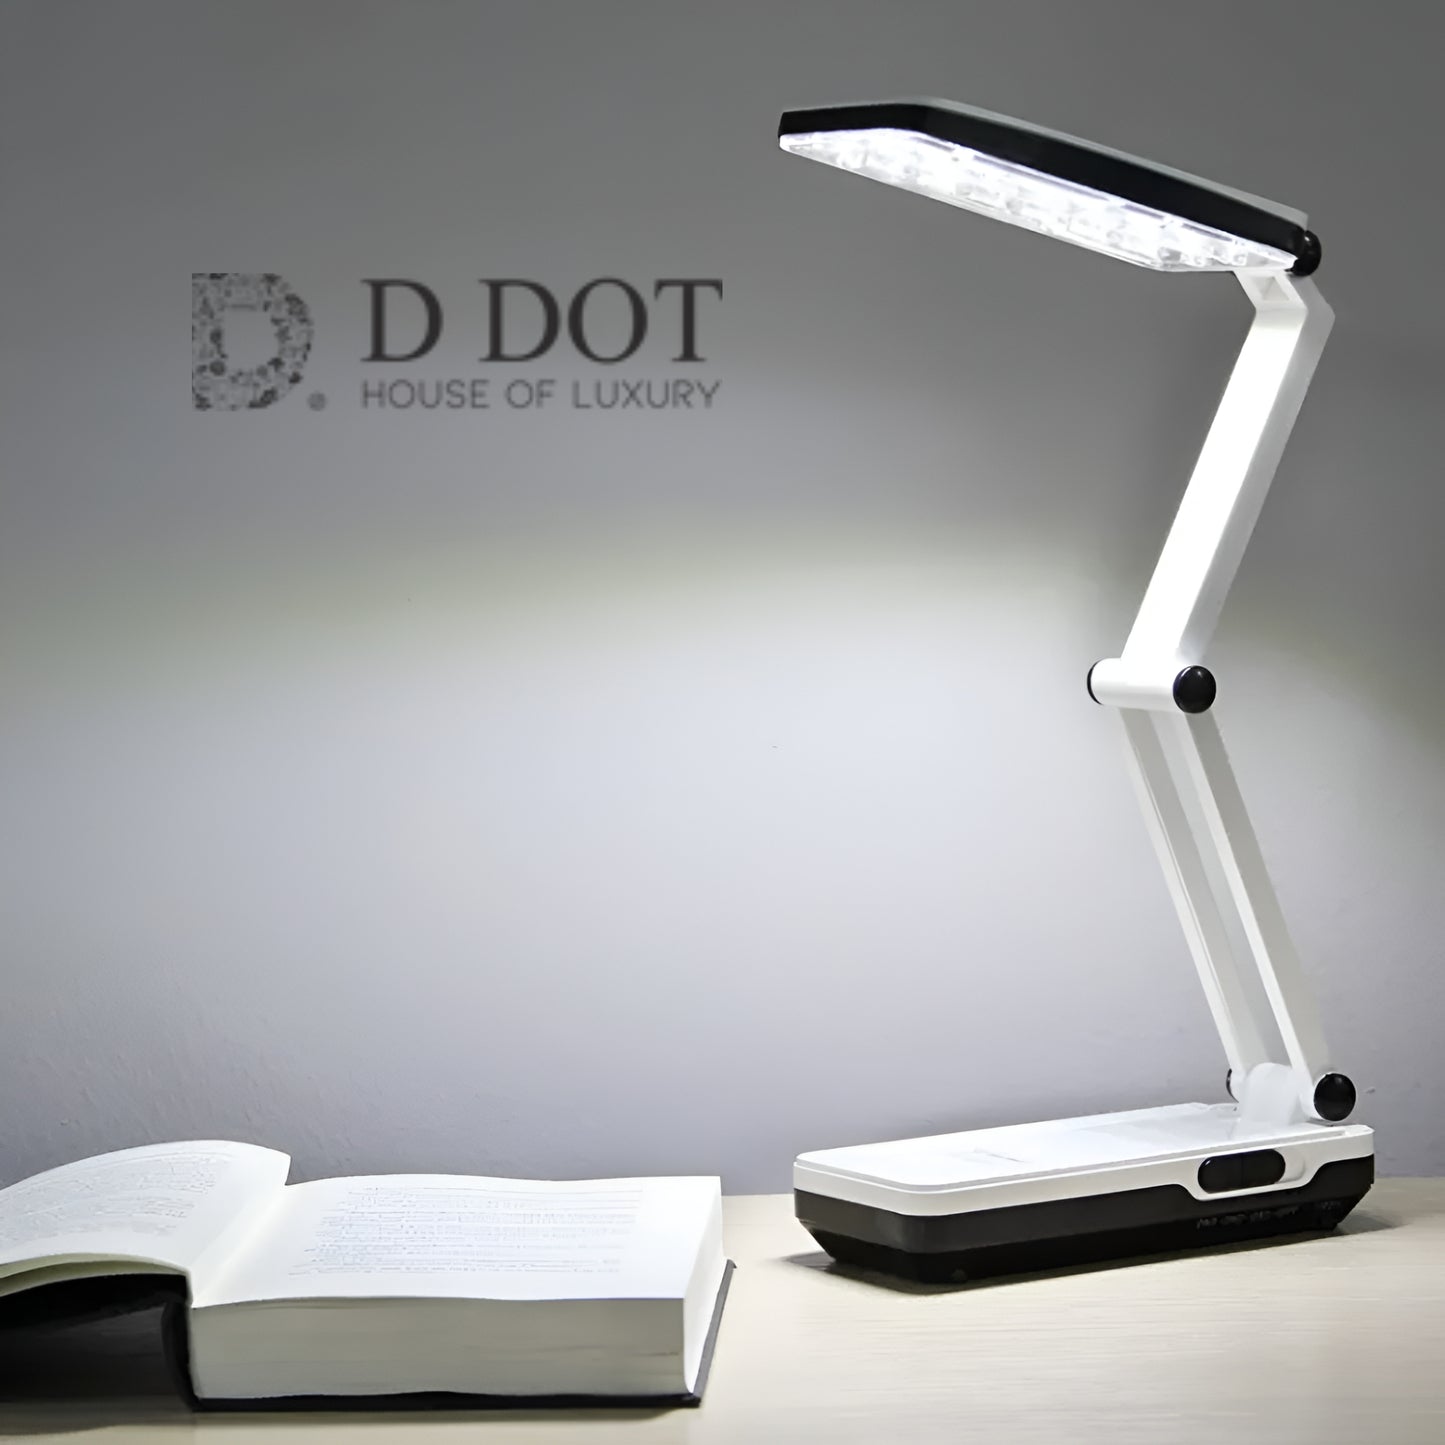 "LED Rechargeable Desk Lamp - Portable and Adjustable Lighting Solution"